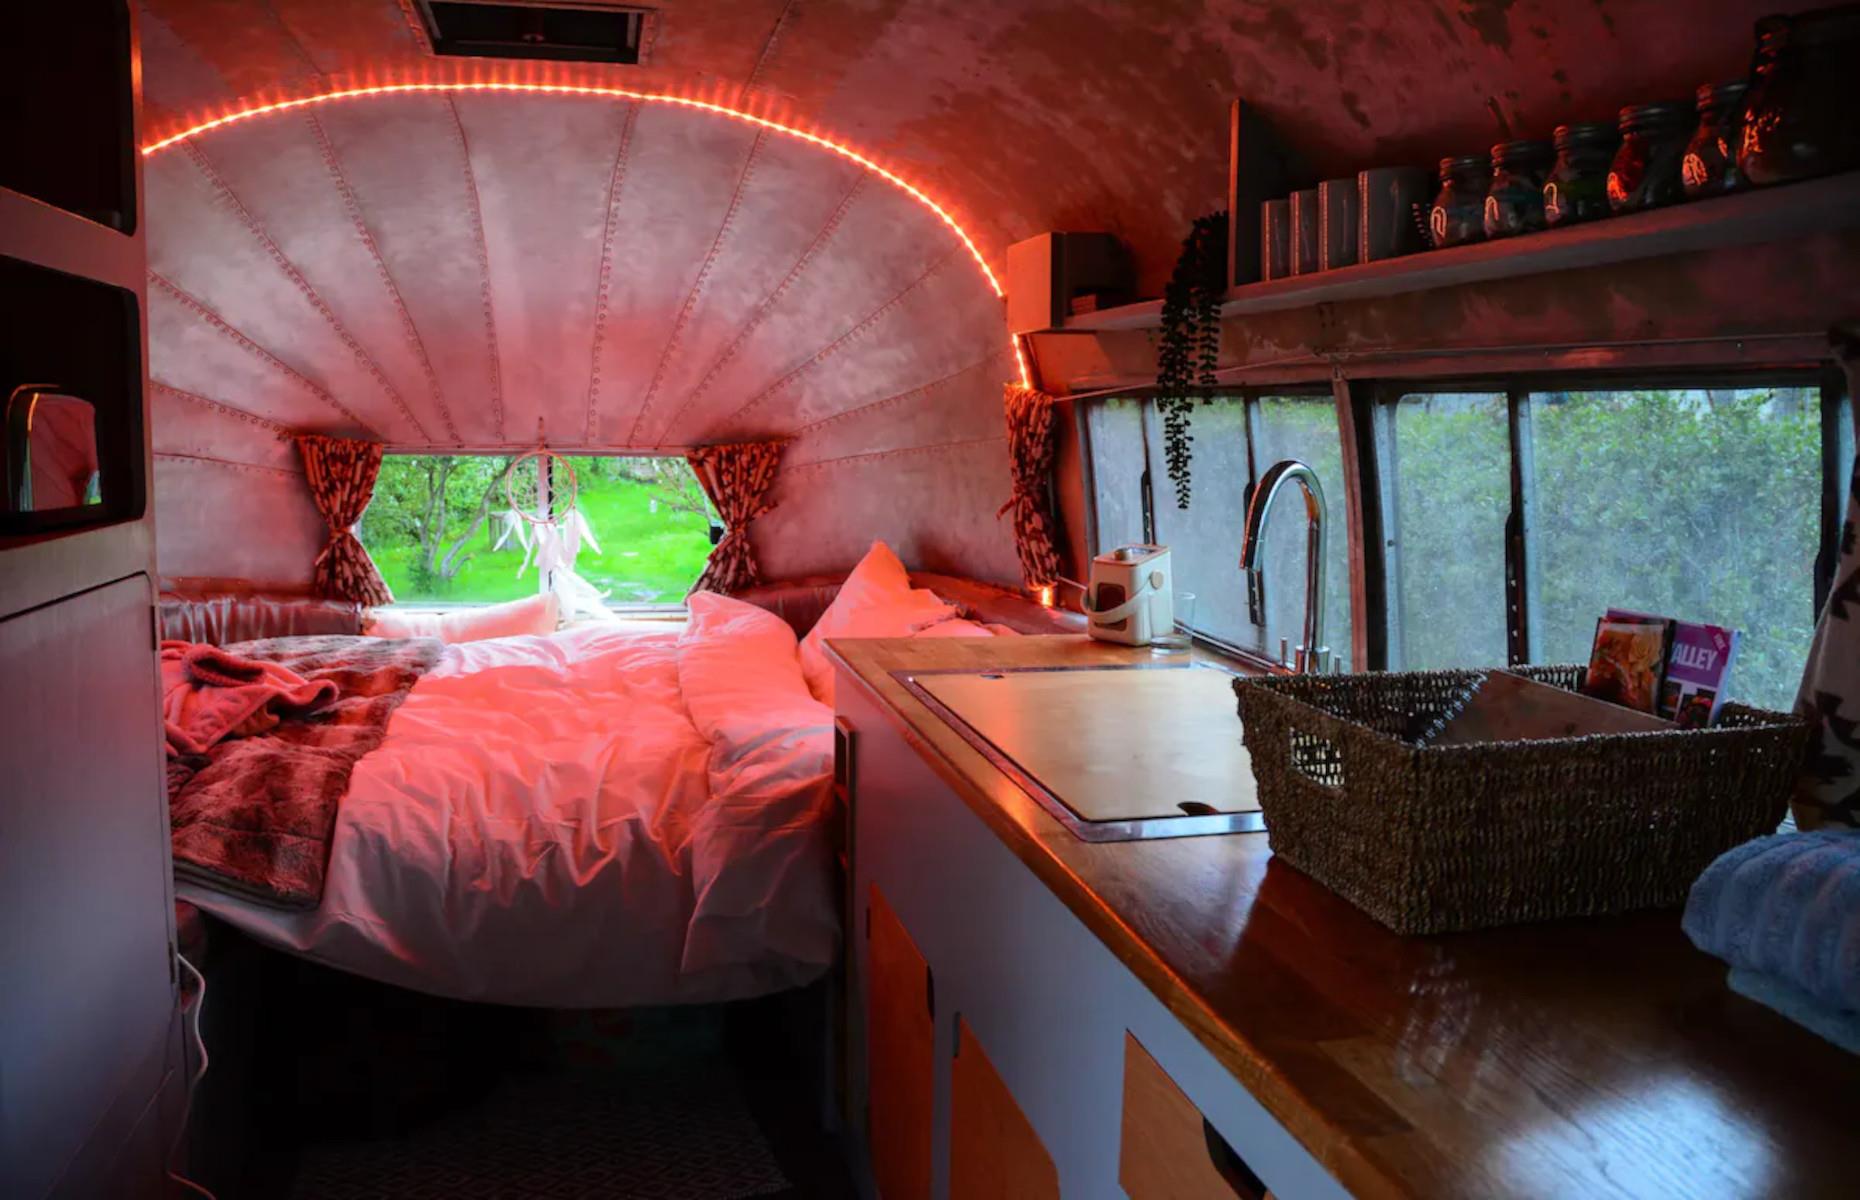 <p>For lovers of <a href="https://www.loveproperty.com/gallerylist/136446/24-cottagecore-decor-ideas-for-a-modern-take-on-country-style">cottagecore</a>, this vintage-inspired Airstream will be a dream come true. Complete with a cozy sleeping nook, a fully equipped galley kitchen, small dressing room, and a comfortable seating area, what this caravan lacks in space it more than makes up for in charm. </p>